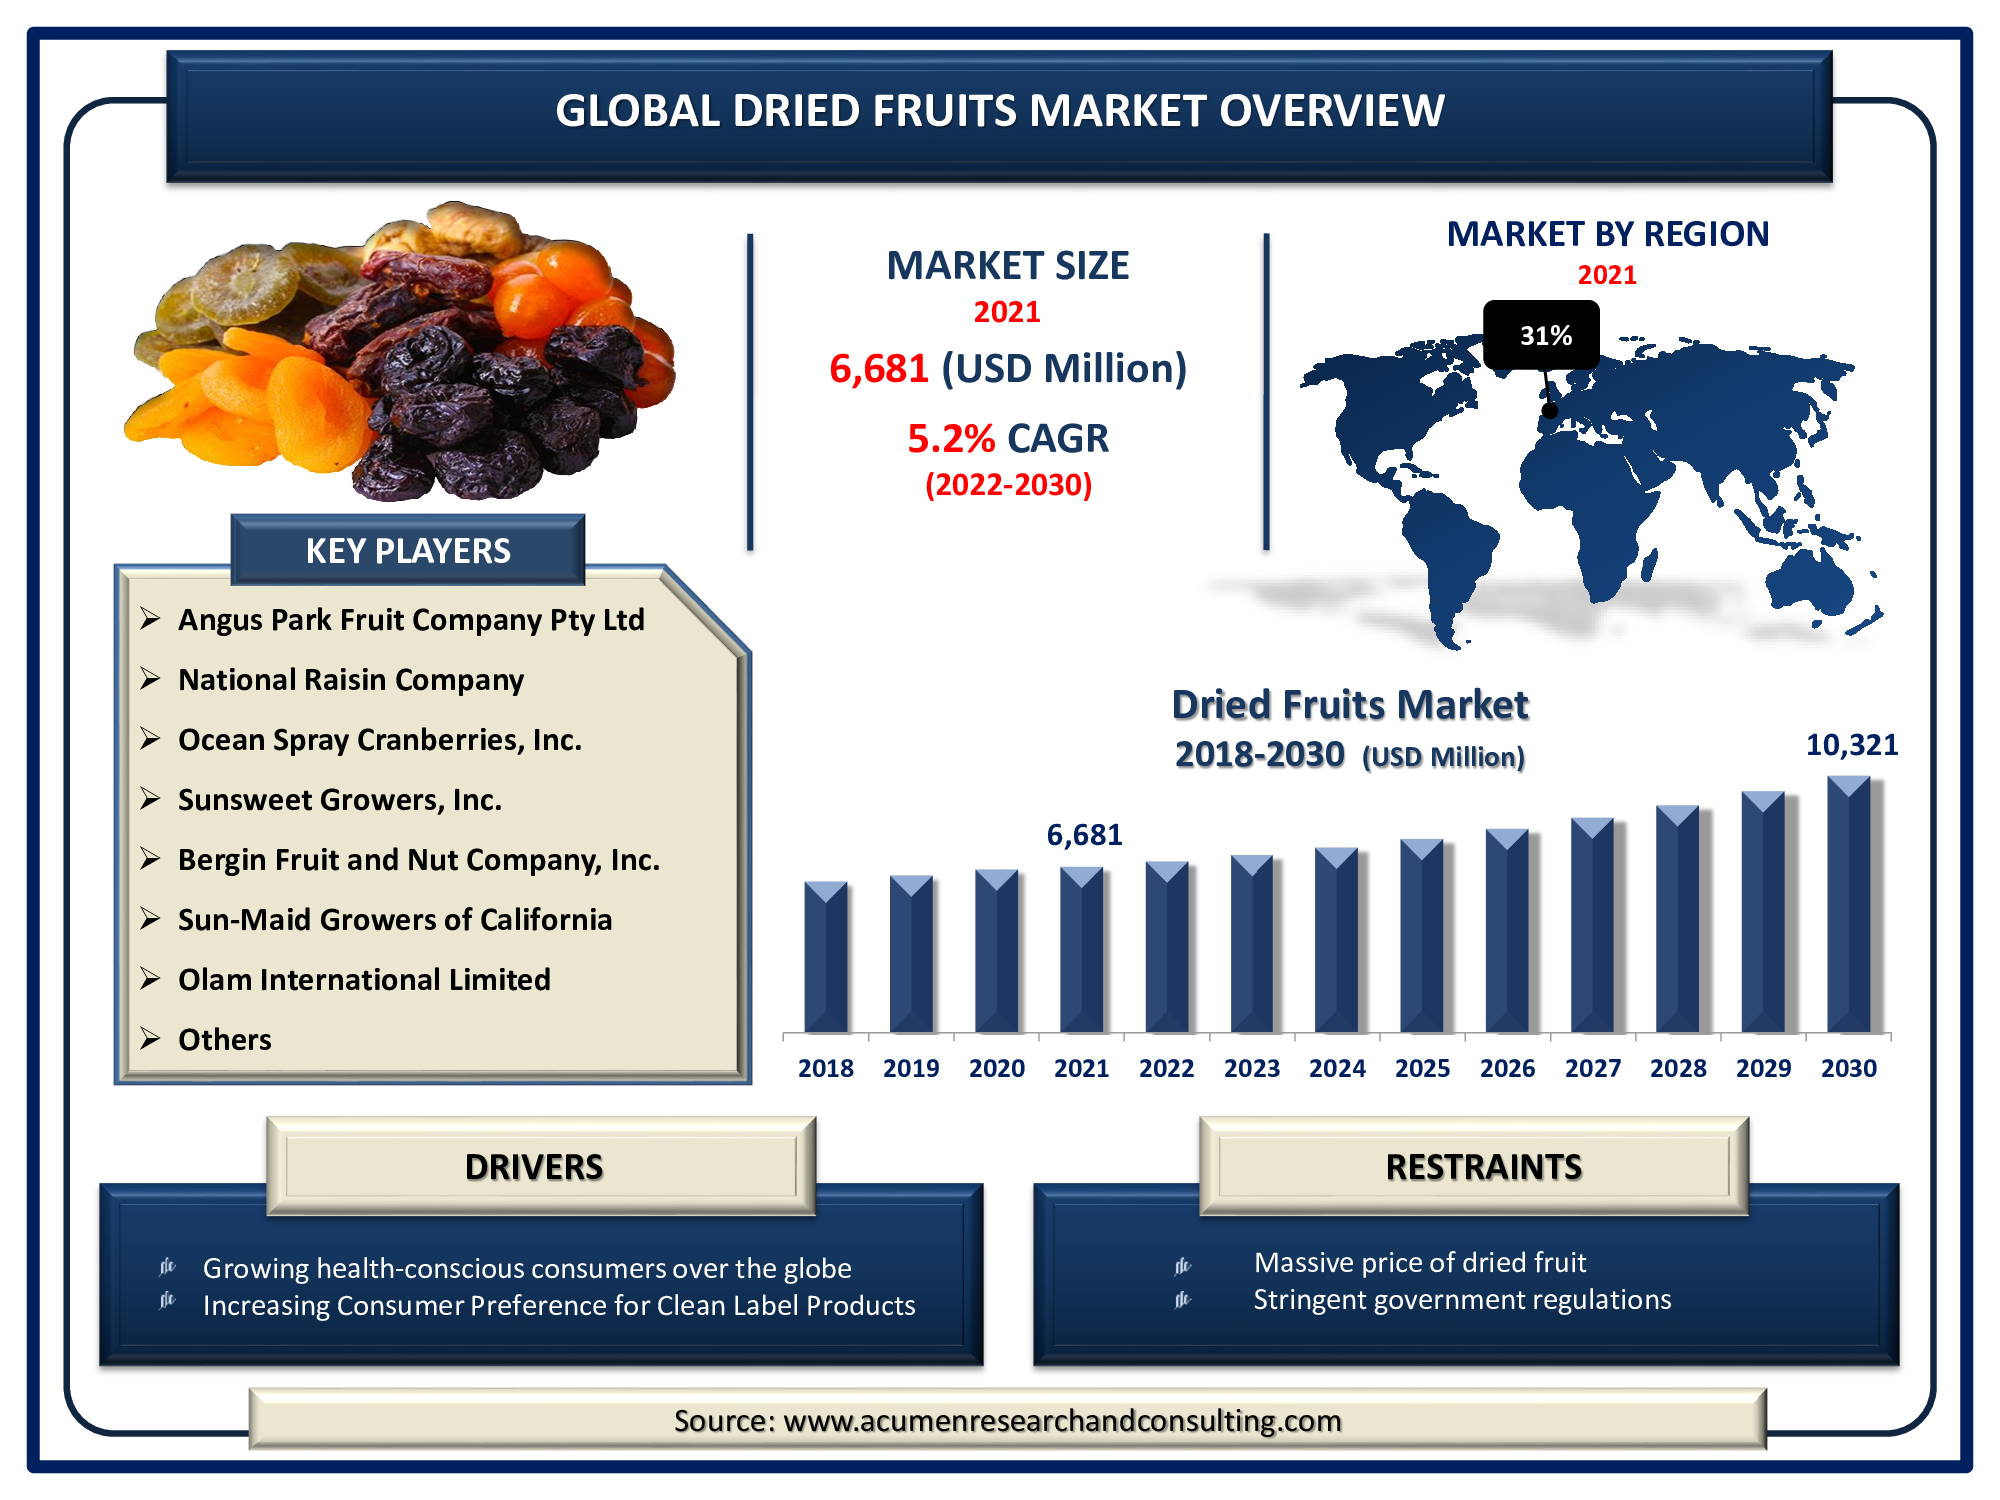 Dried Fruits Market Size was valued at USD 6,681 Million in 2021 and is predicted to be worth USD 10,321 Million by 2030, with a CAGR of 5.2% from 2022 to 2030.